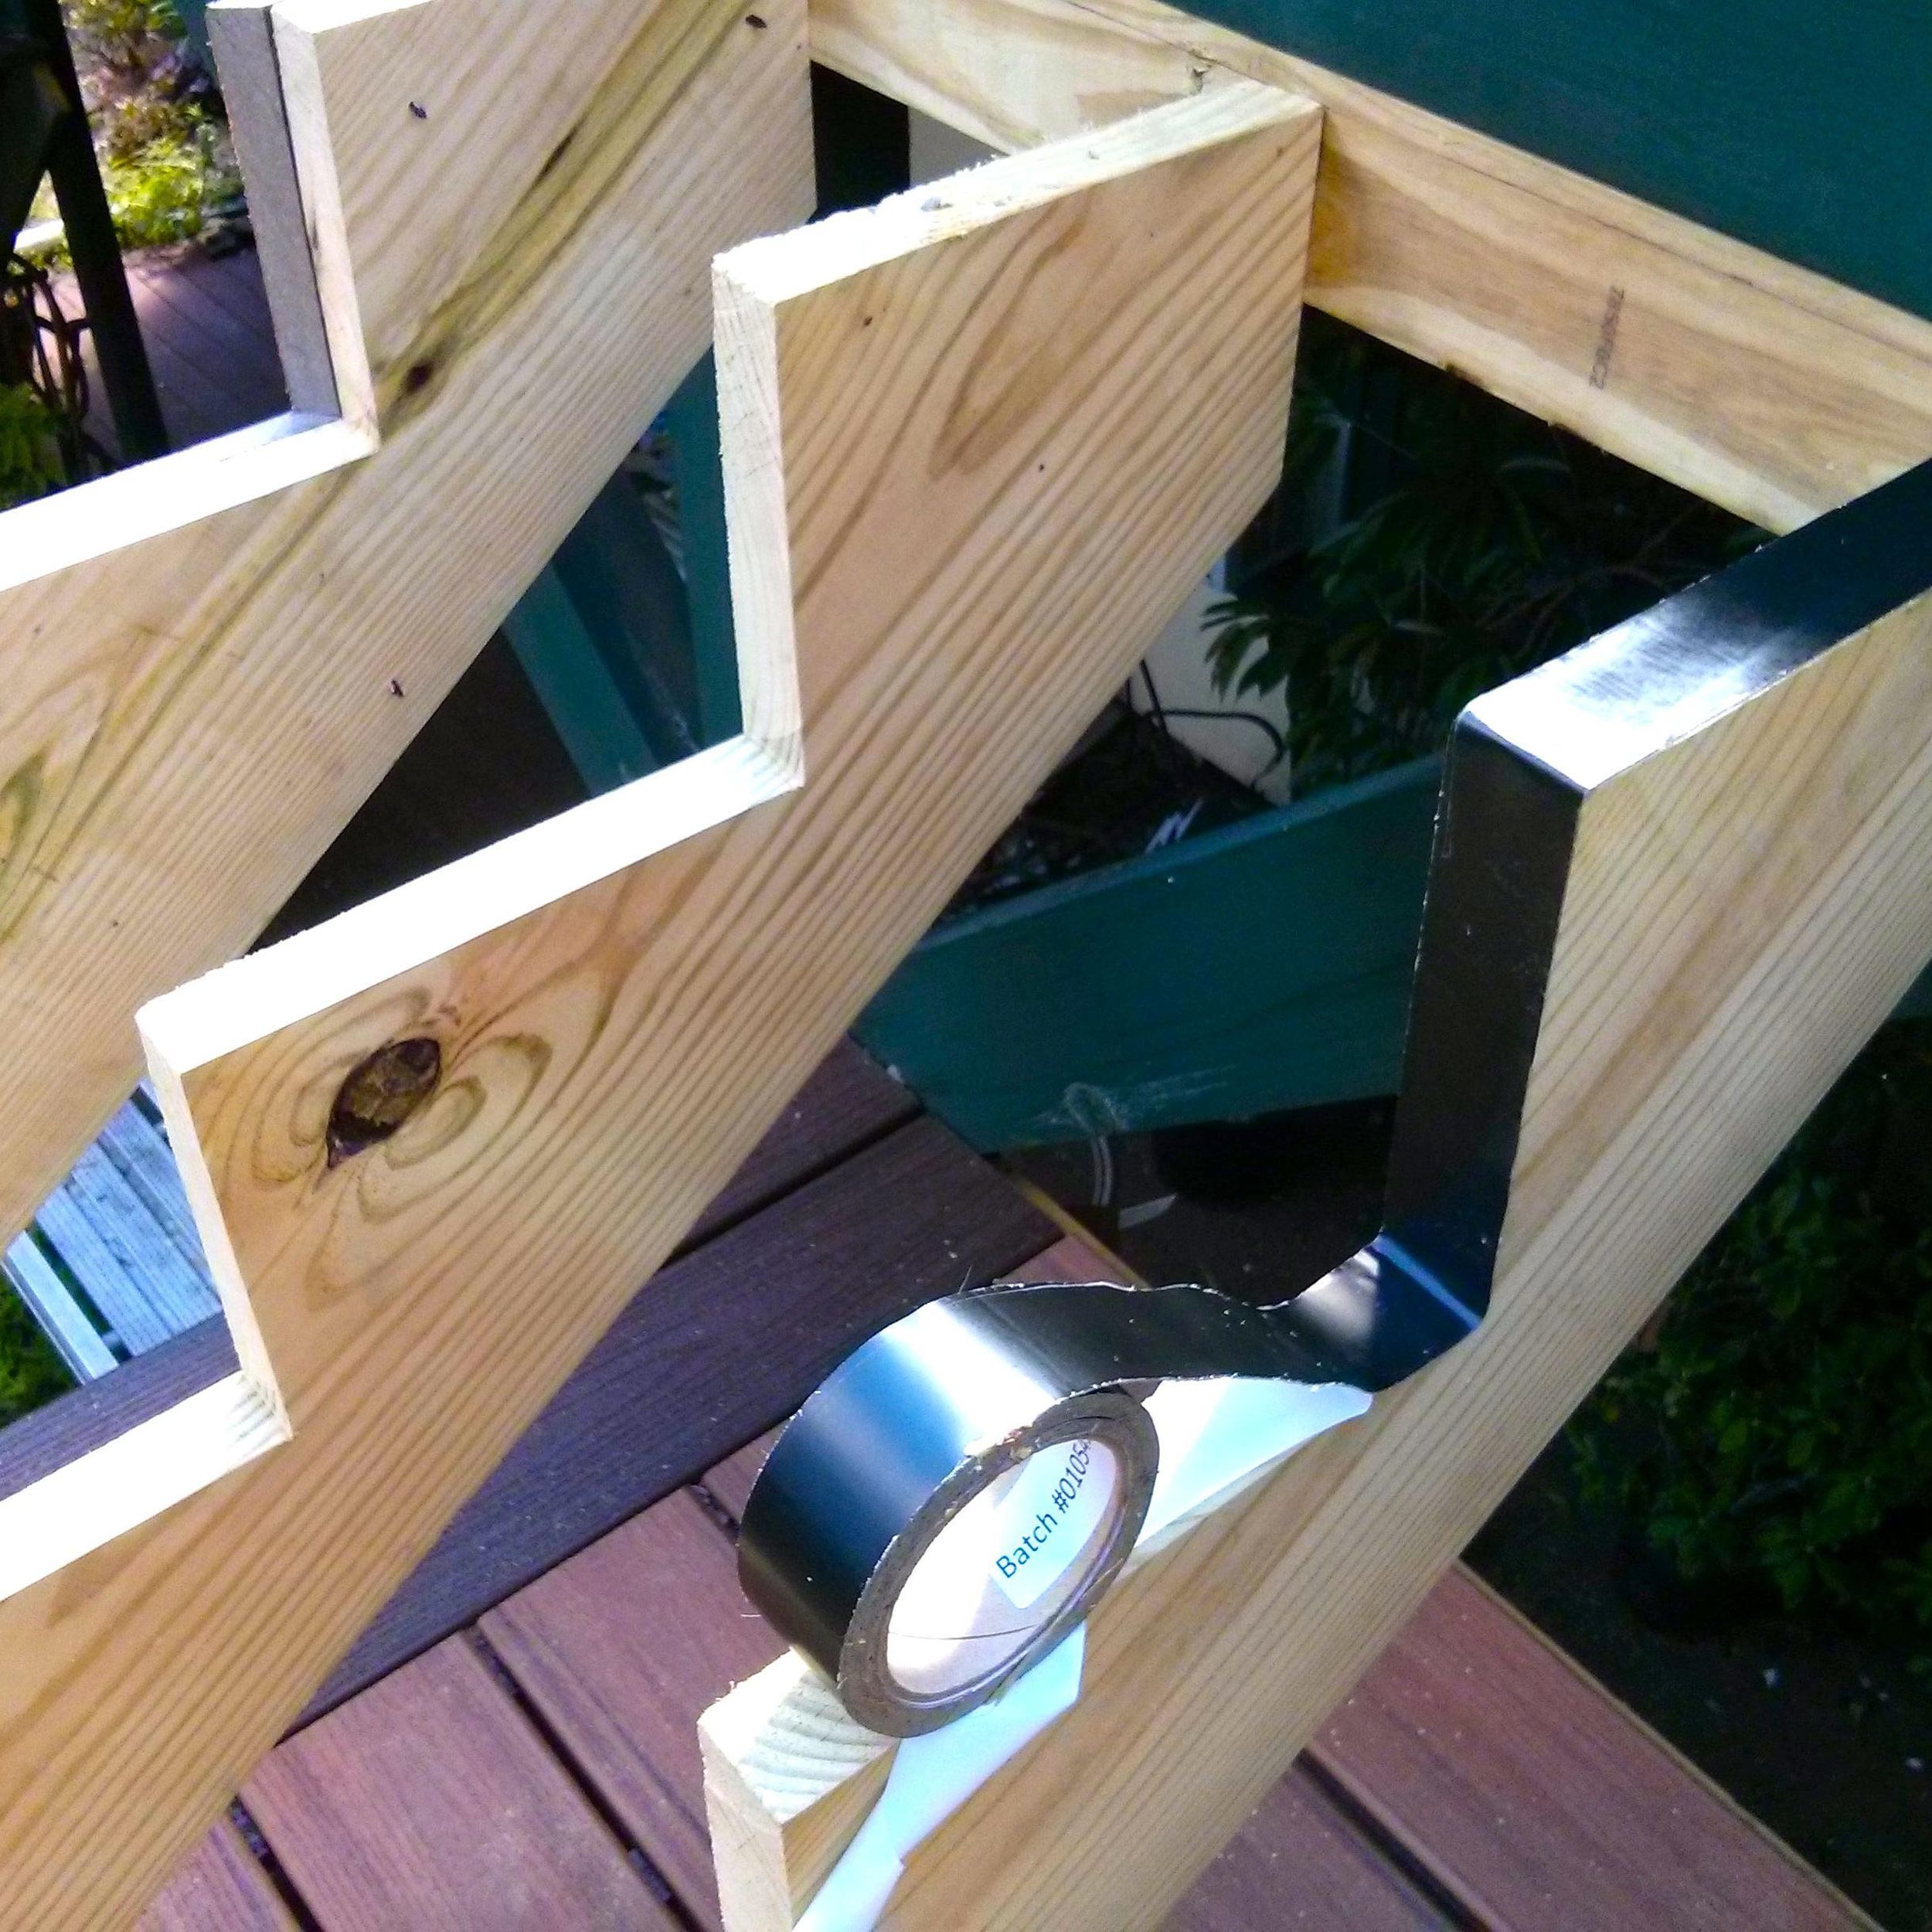 How To Build Exterior Stairs That Last, How To Protect Outdoor Wooden Stairs